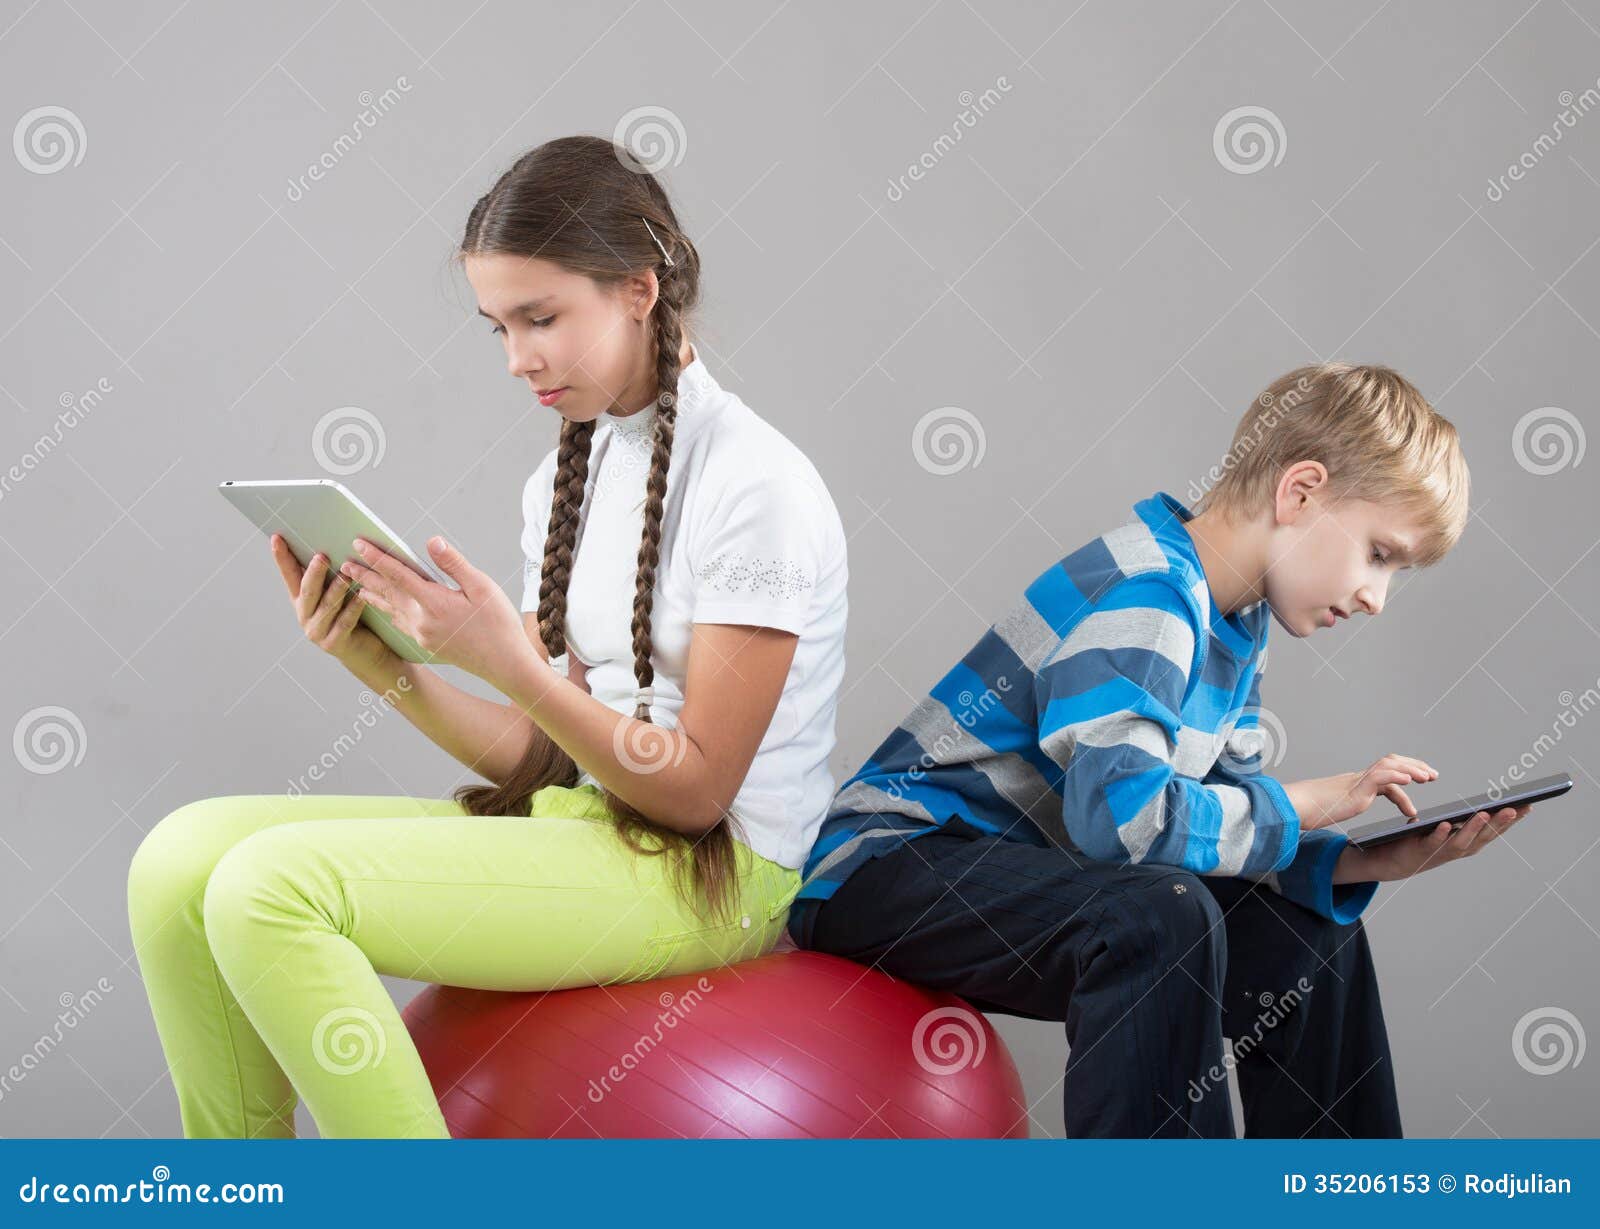 girl and boy looking at pad tablet pc screens